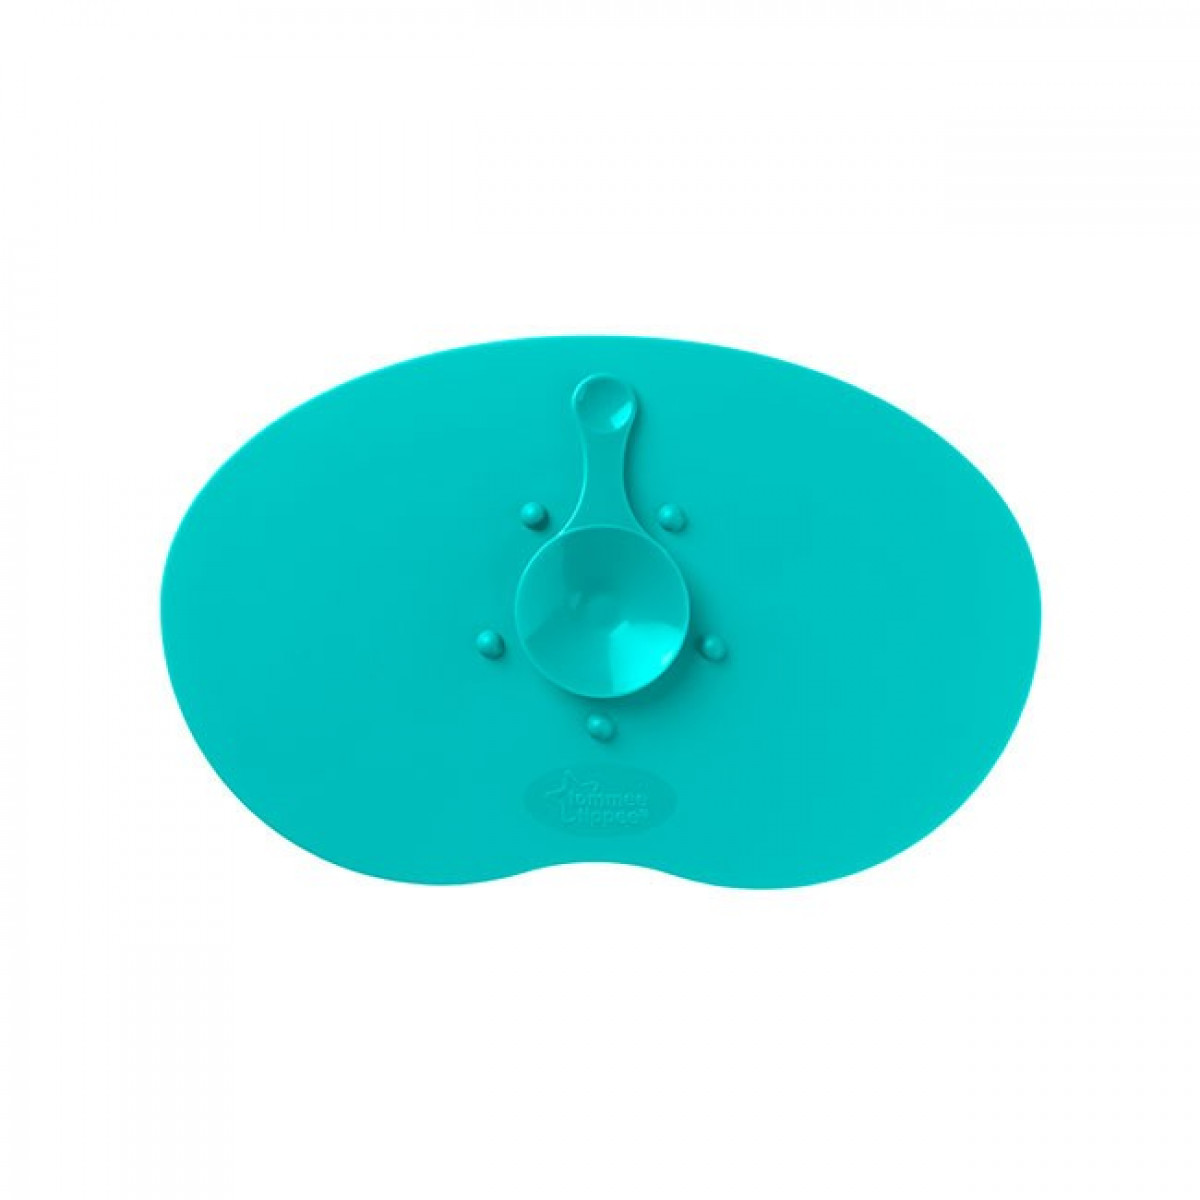 Support en silicone bleu Tommee Tippee - Boutique Toup'tibou - photo 7